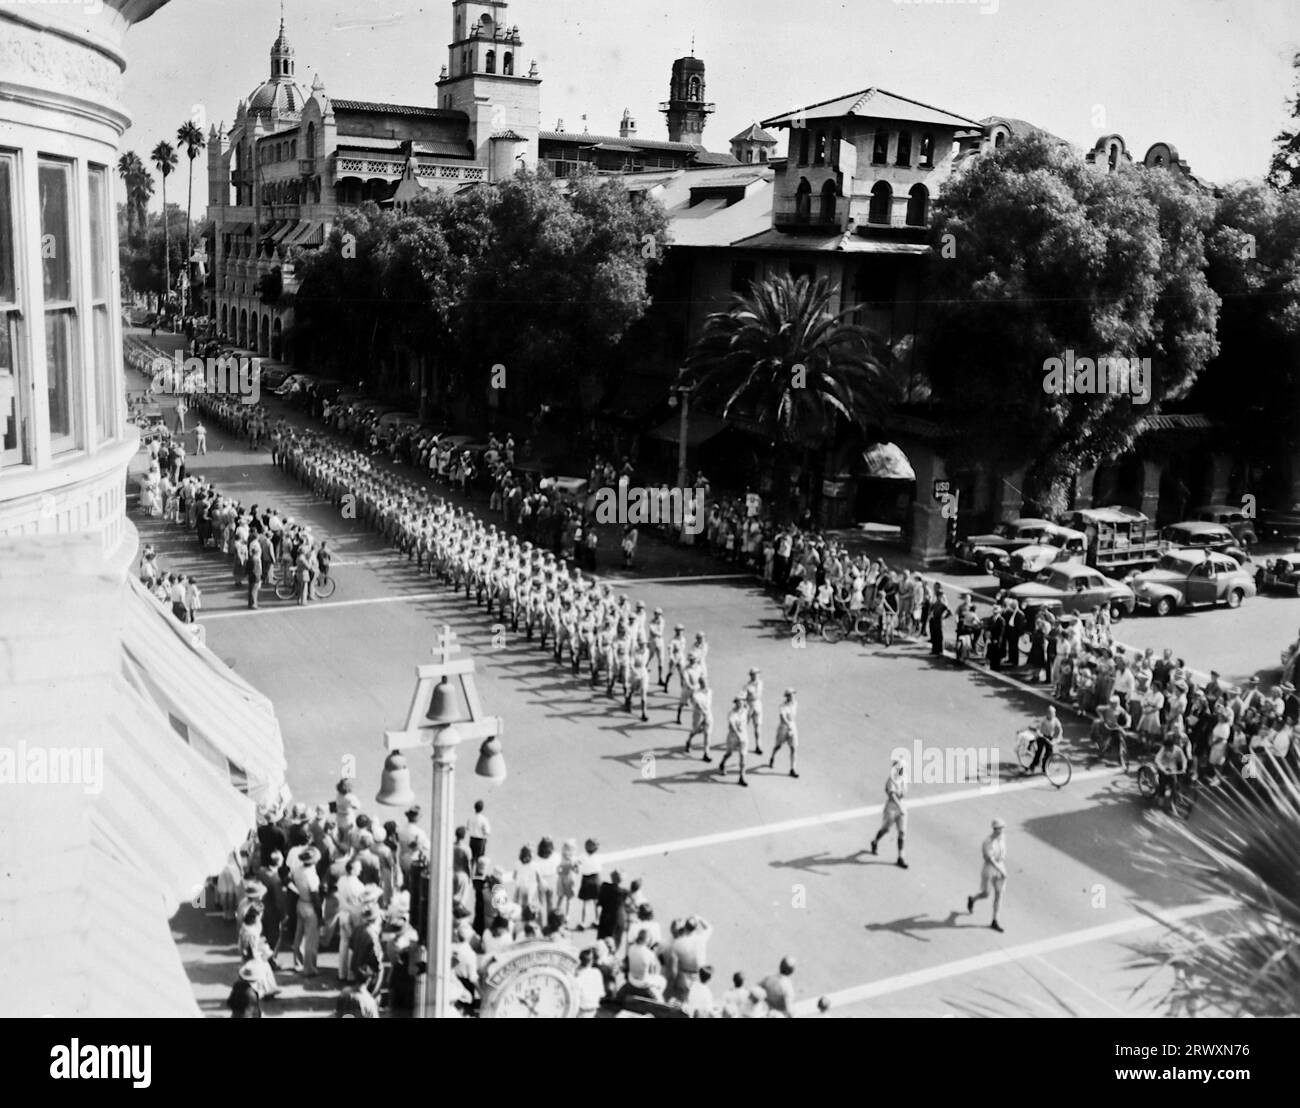 Parade at Riverside, California:  A birds-eye view of the parade. Rare photograph: From a collection compiled by an unknown British serviceman covering the No. 1 Composite Demonstration, AA Battery, tour of the USA, from July 11th 1943. This is one from over one hundred images in the collection which were on average around 4x3 inches. Stock Photo